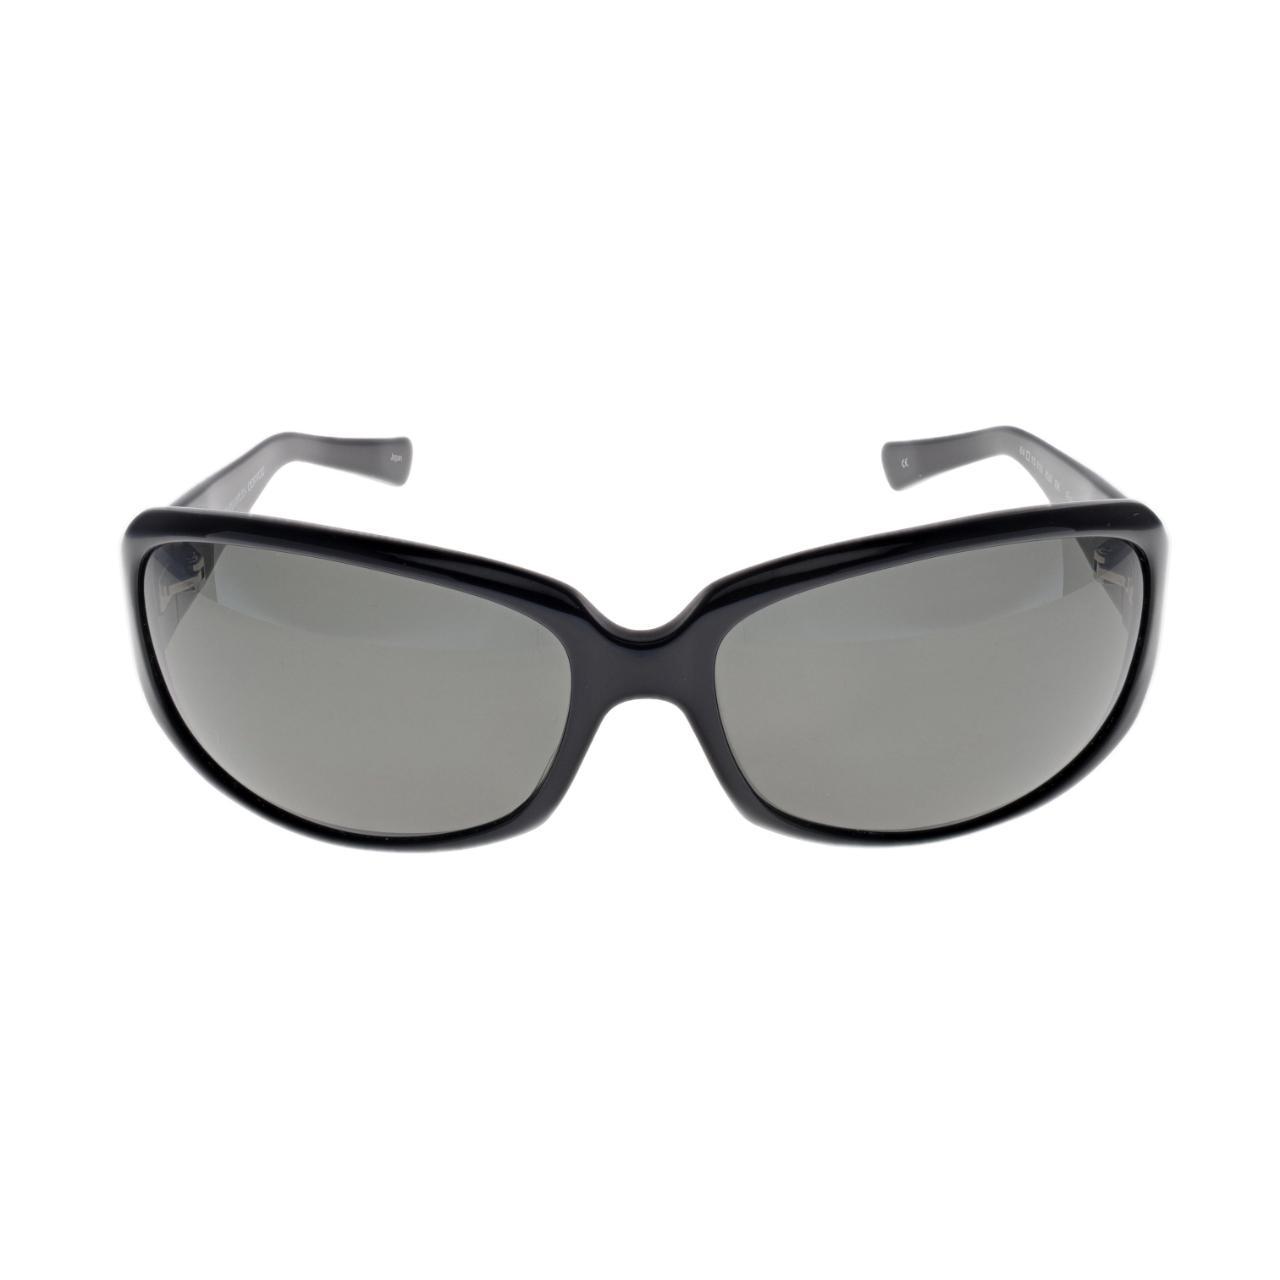 Oliver Peoples Women's Black and Grey Sunglasses (2)